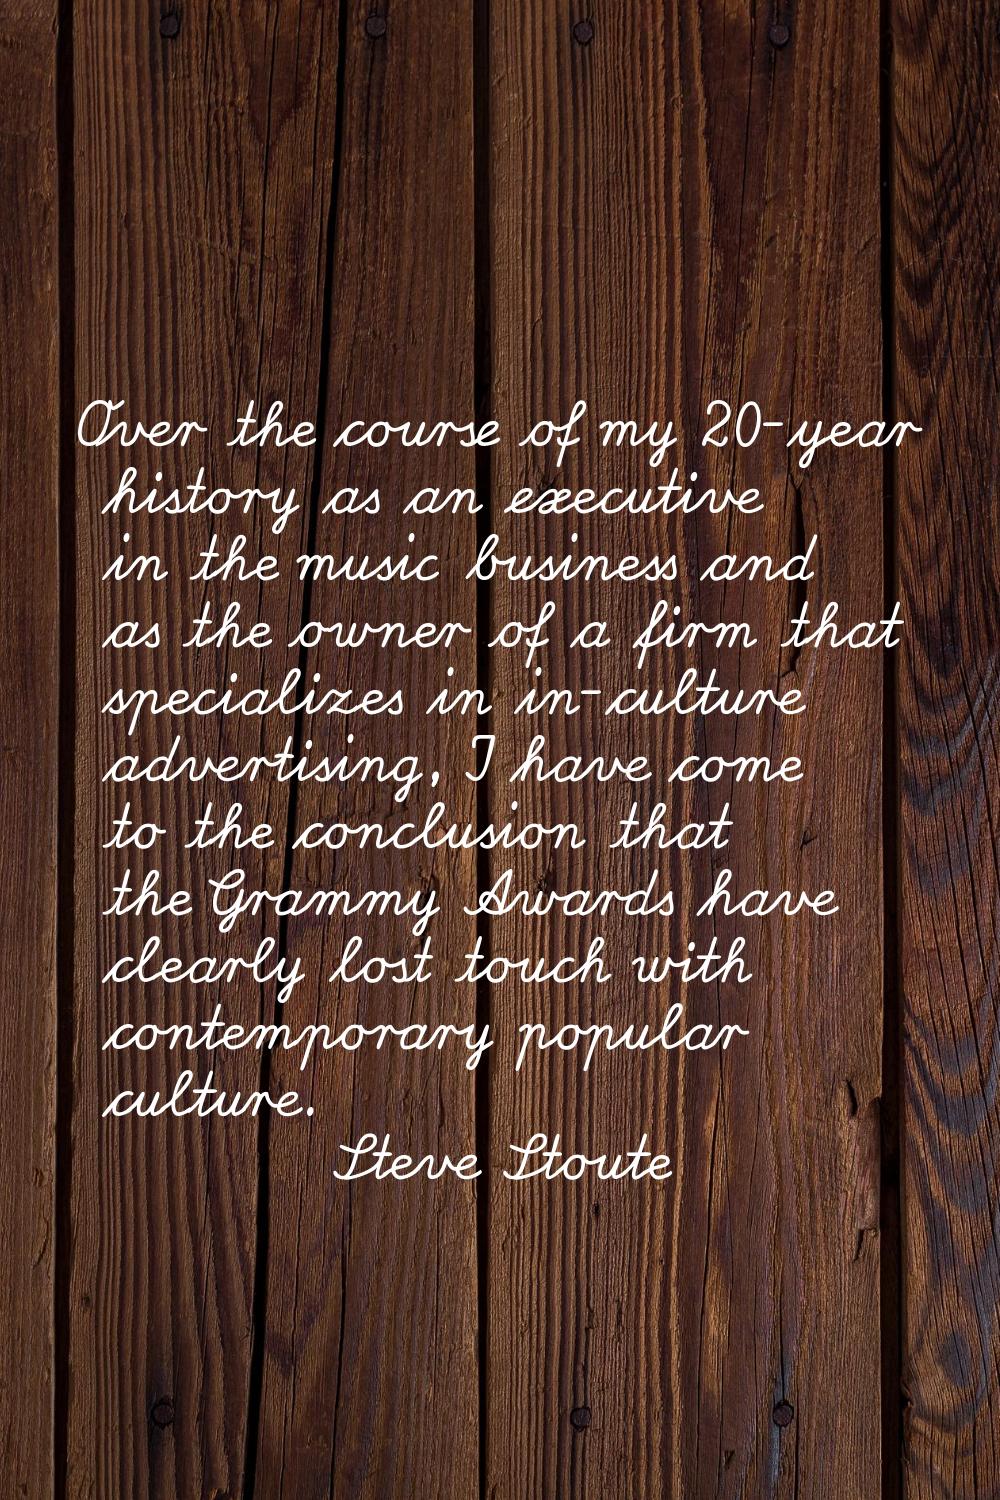 Over the course of my 20-year history as an executive in the music business and as the owner of a f